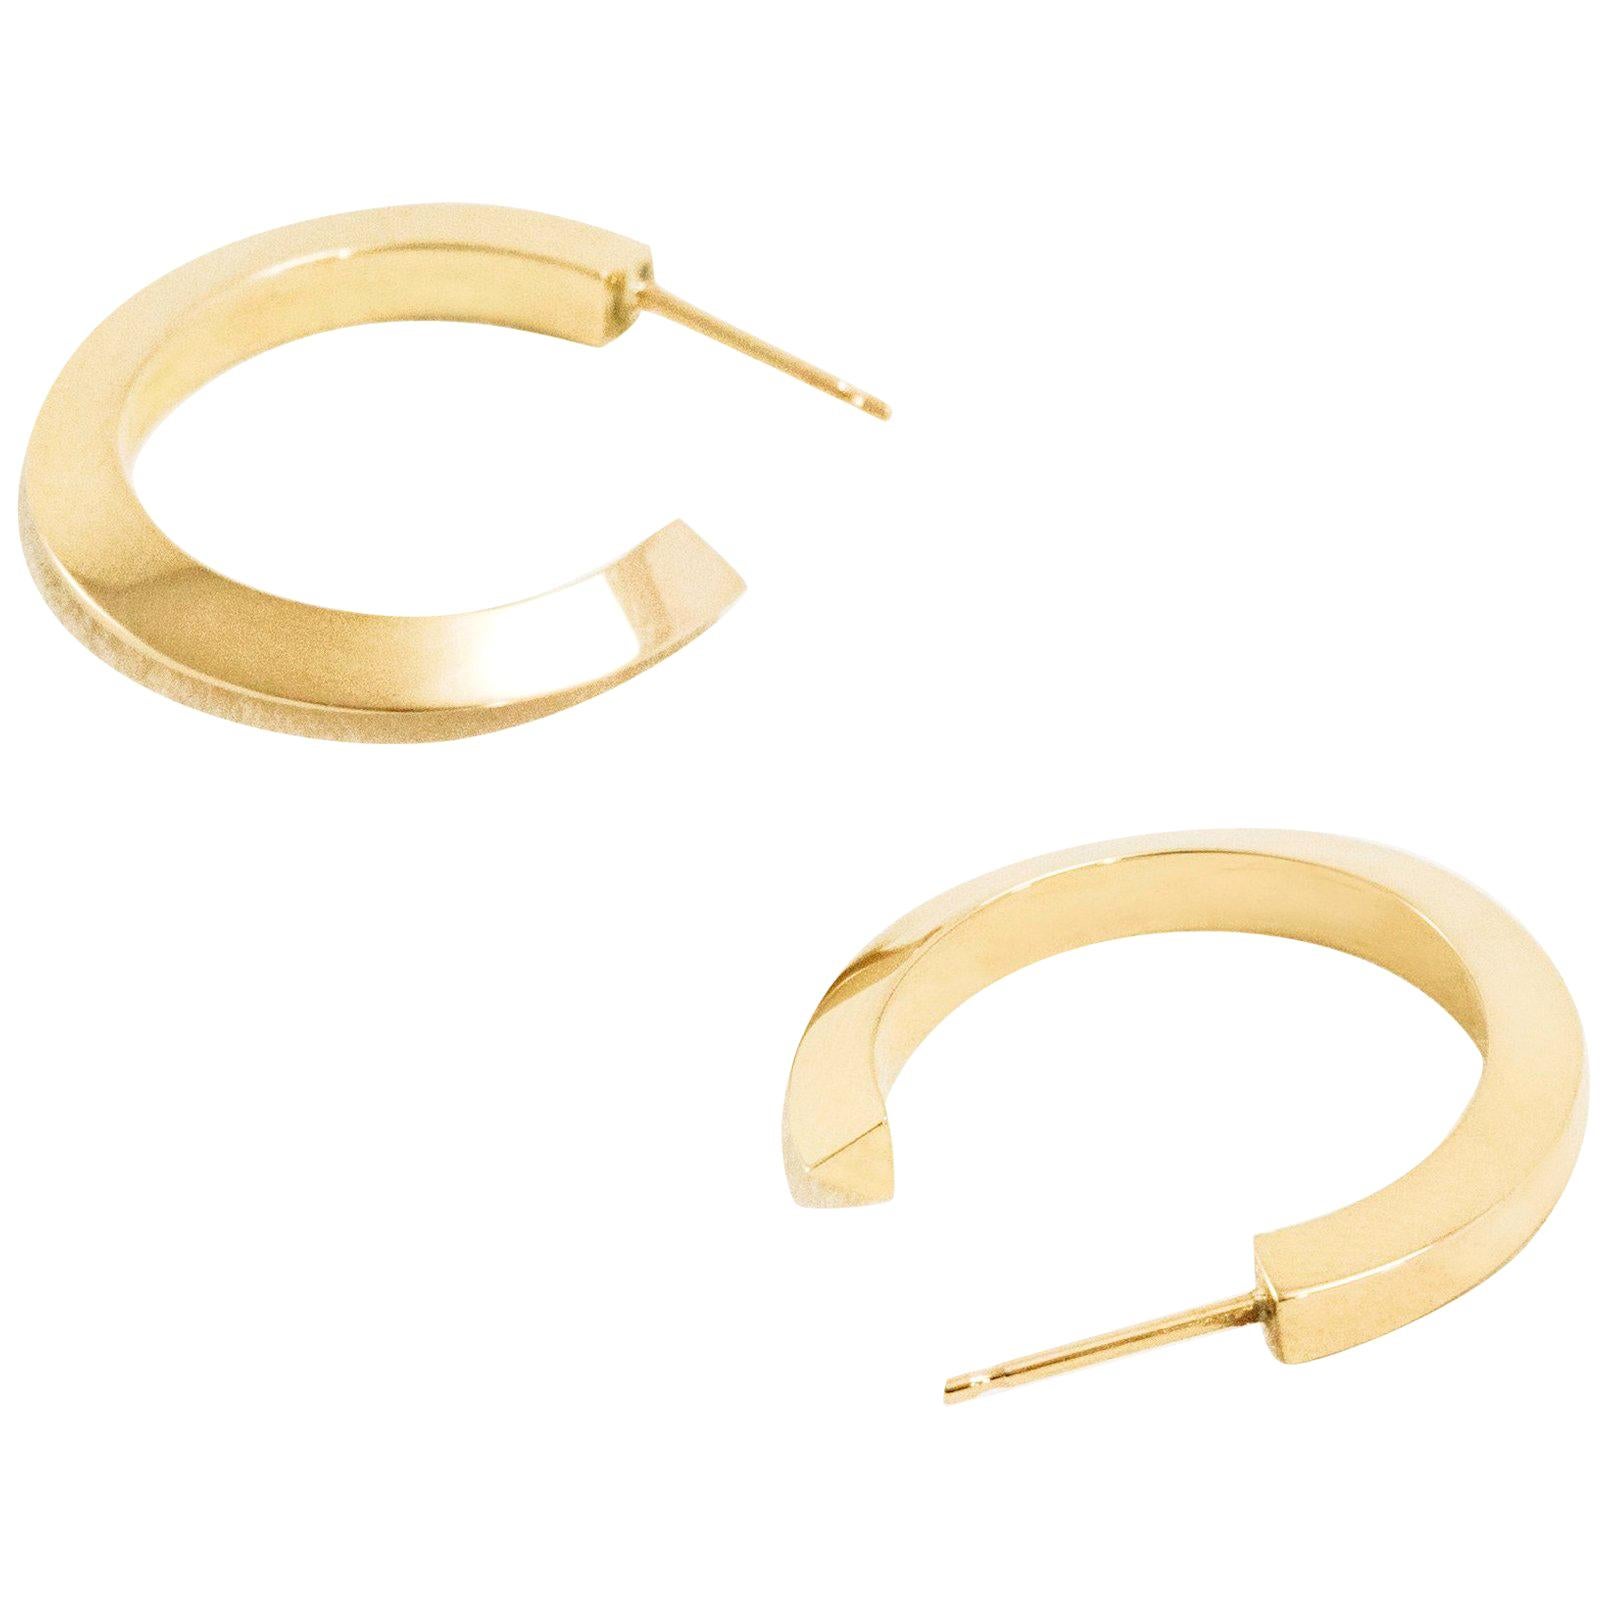 Solid Gold Hoop Earrings Medium Flow Square to Triangle